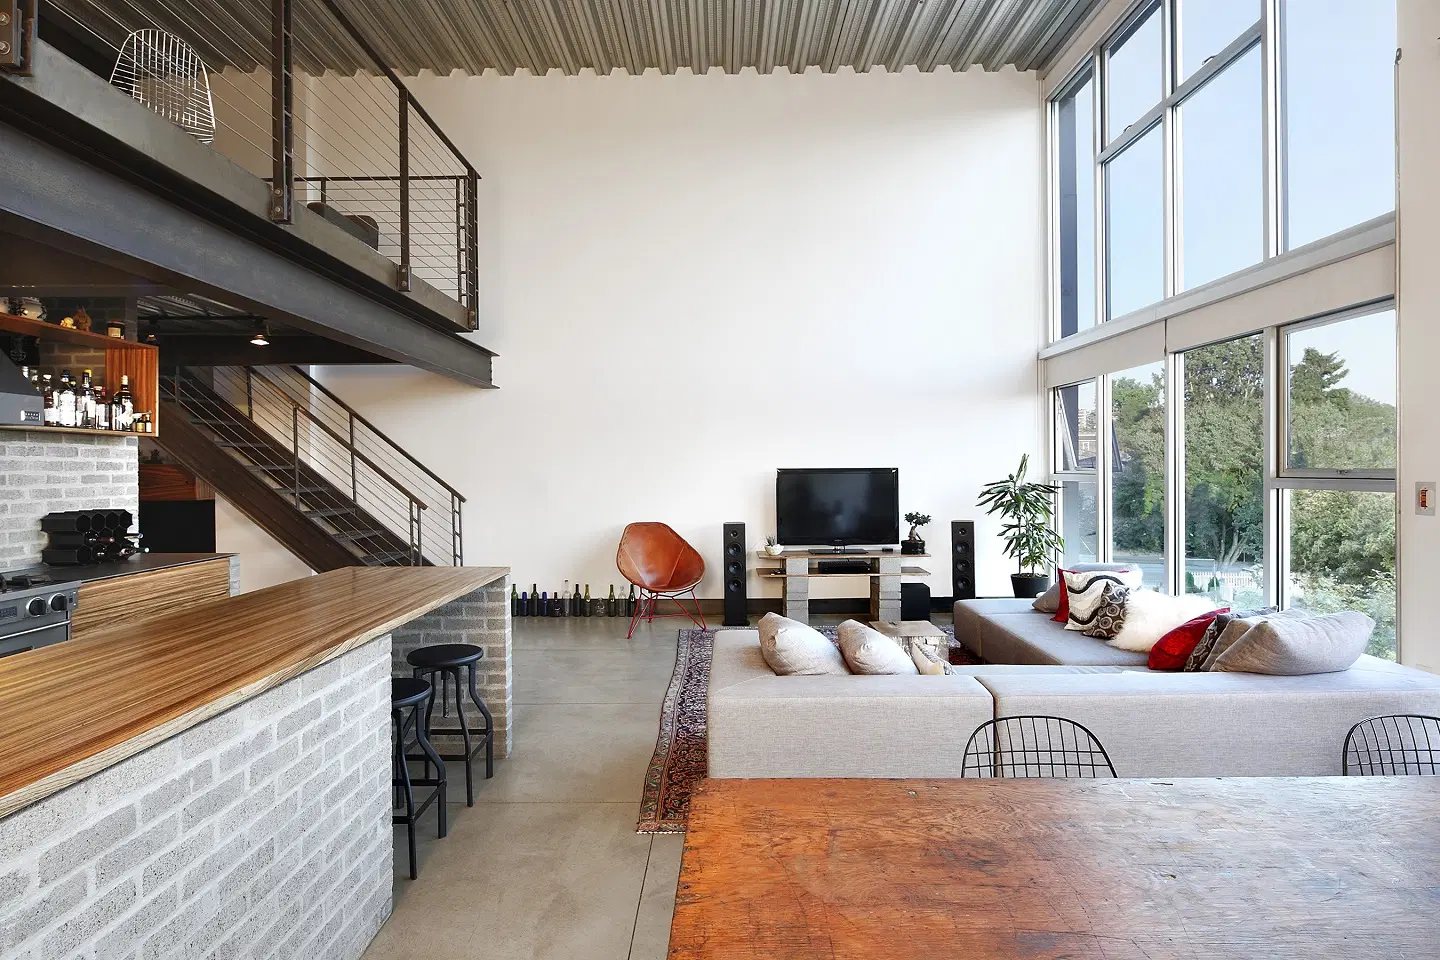  4. Neutral Color Palettes for an Airy Feel in Small Loft Houses Design